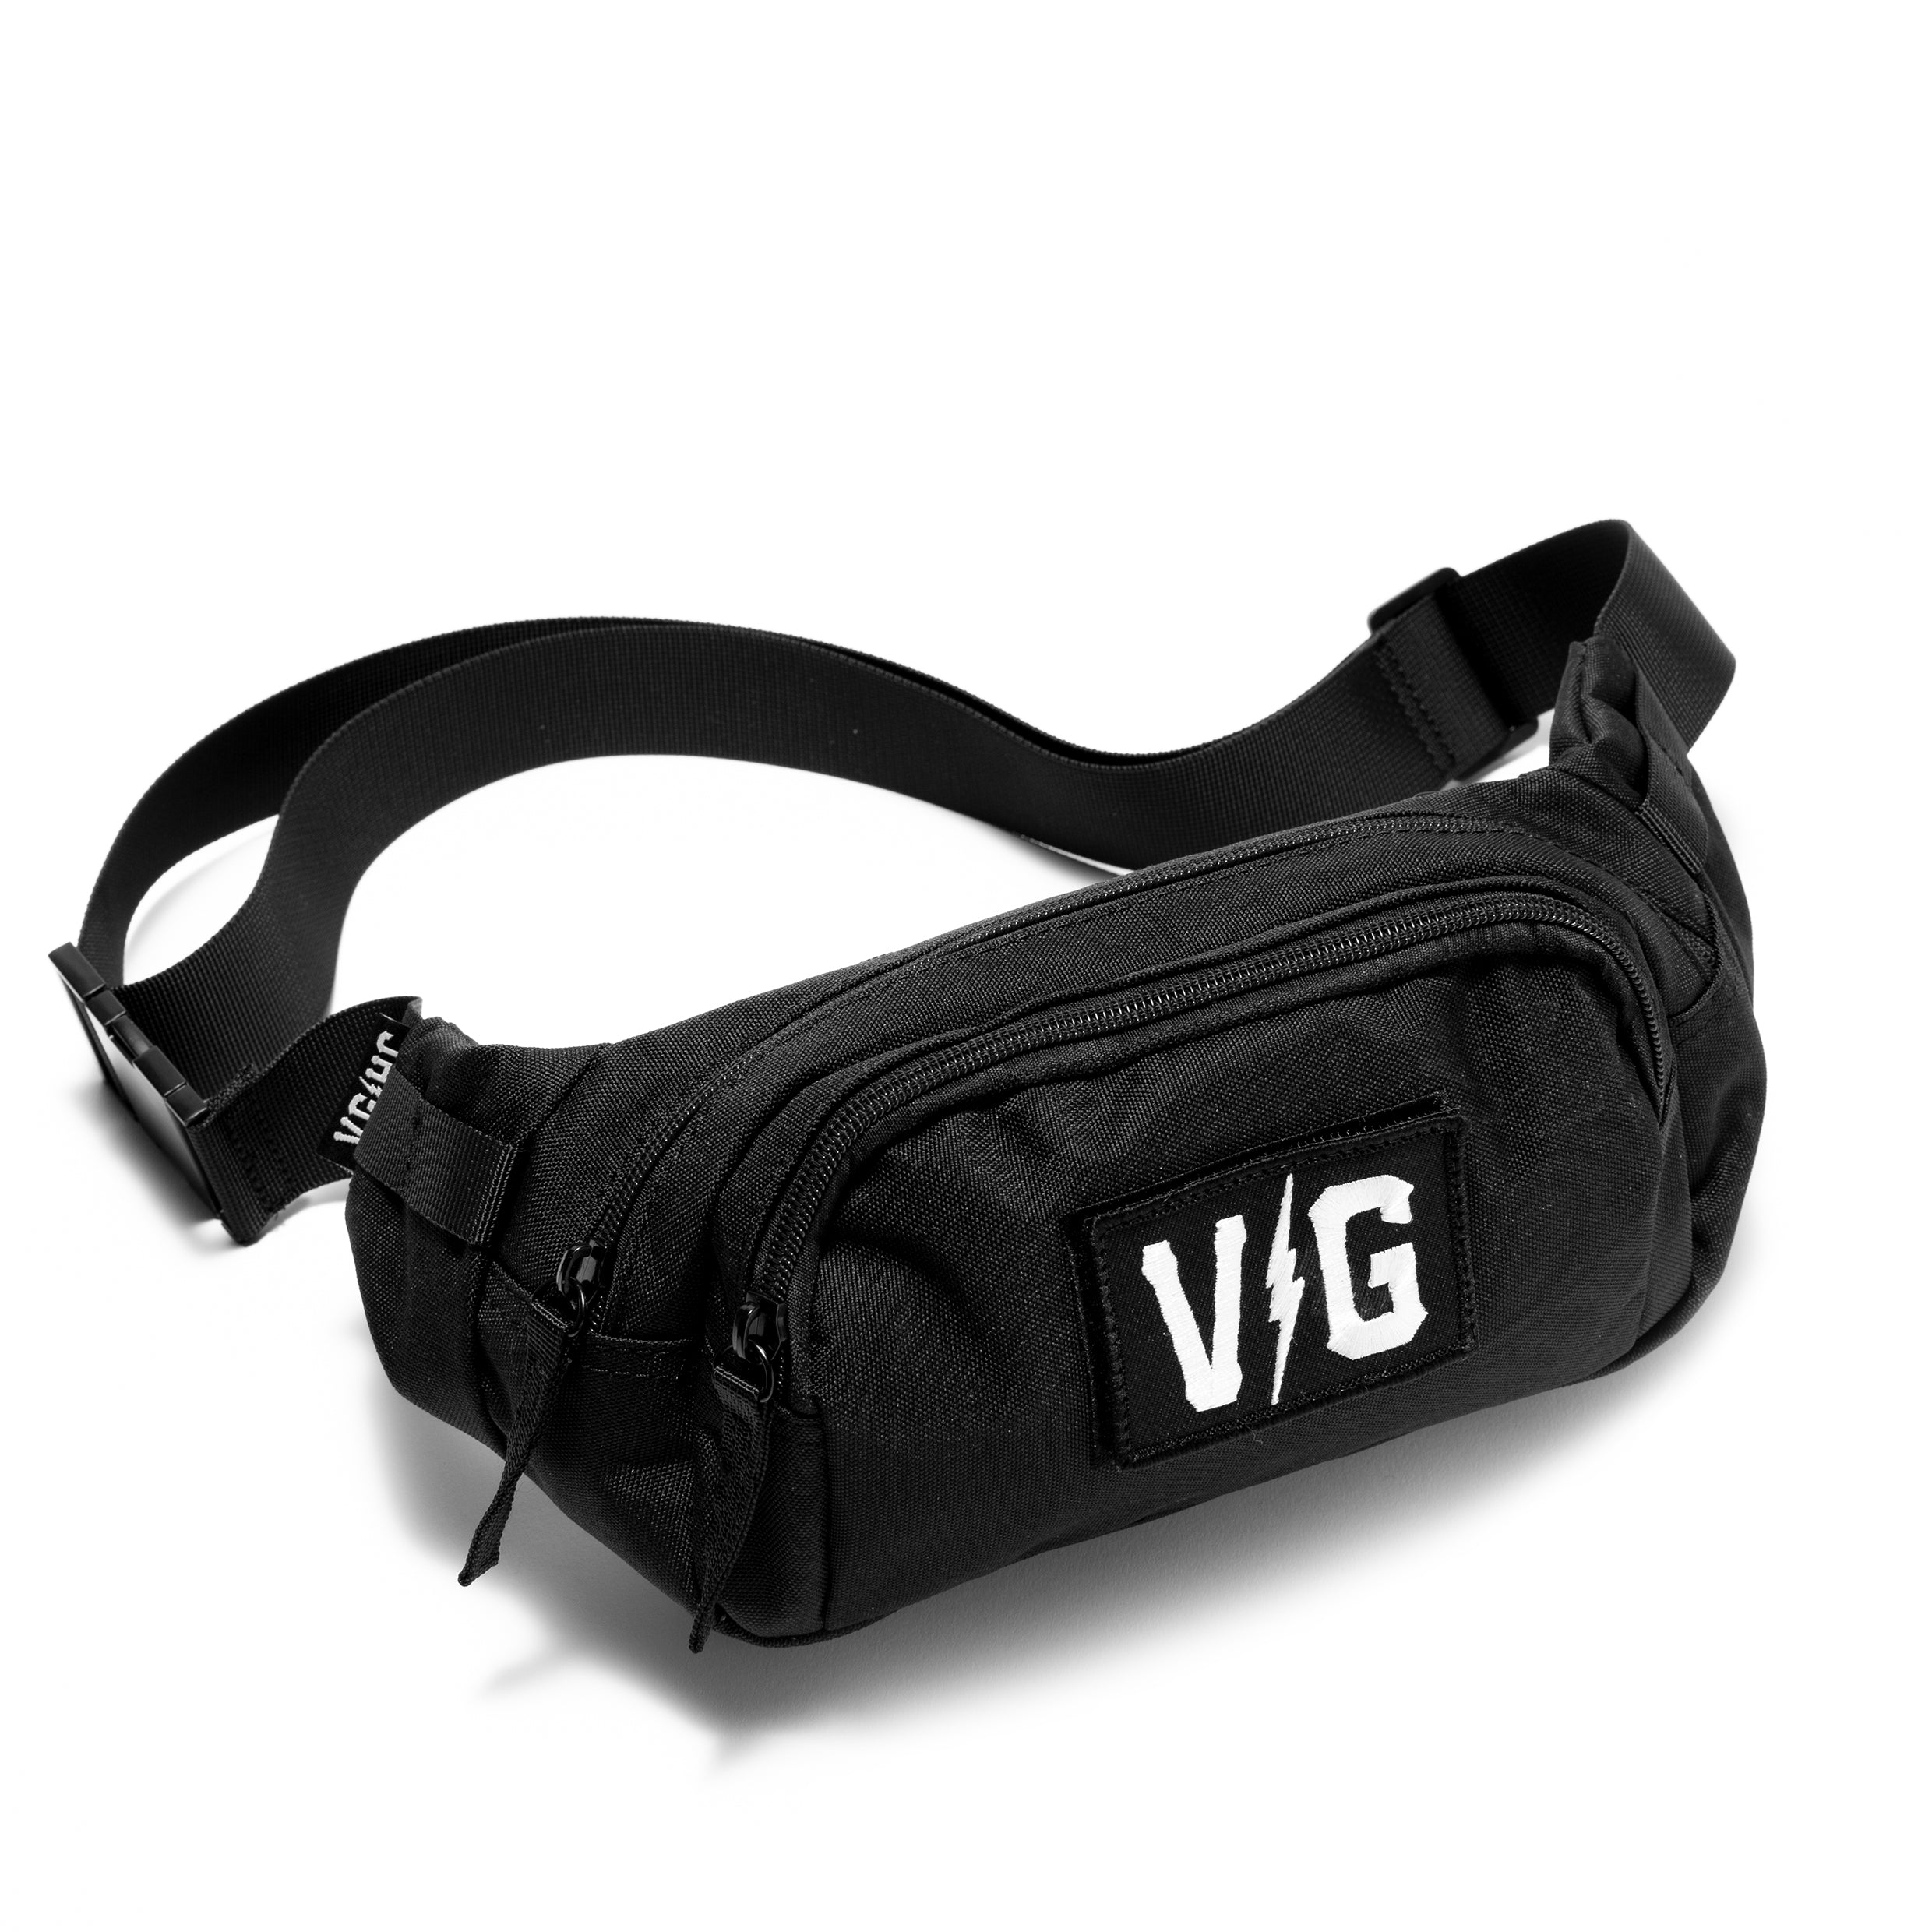 Fanny Packs Are In | lupon.gov.ph